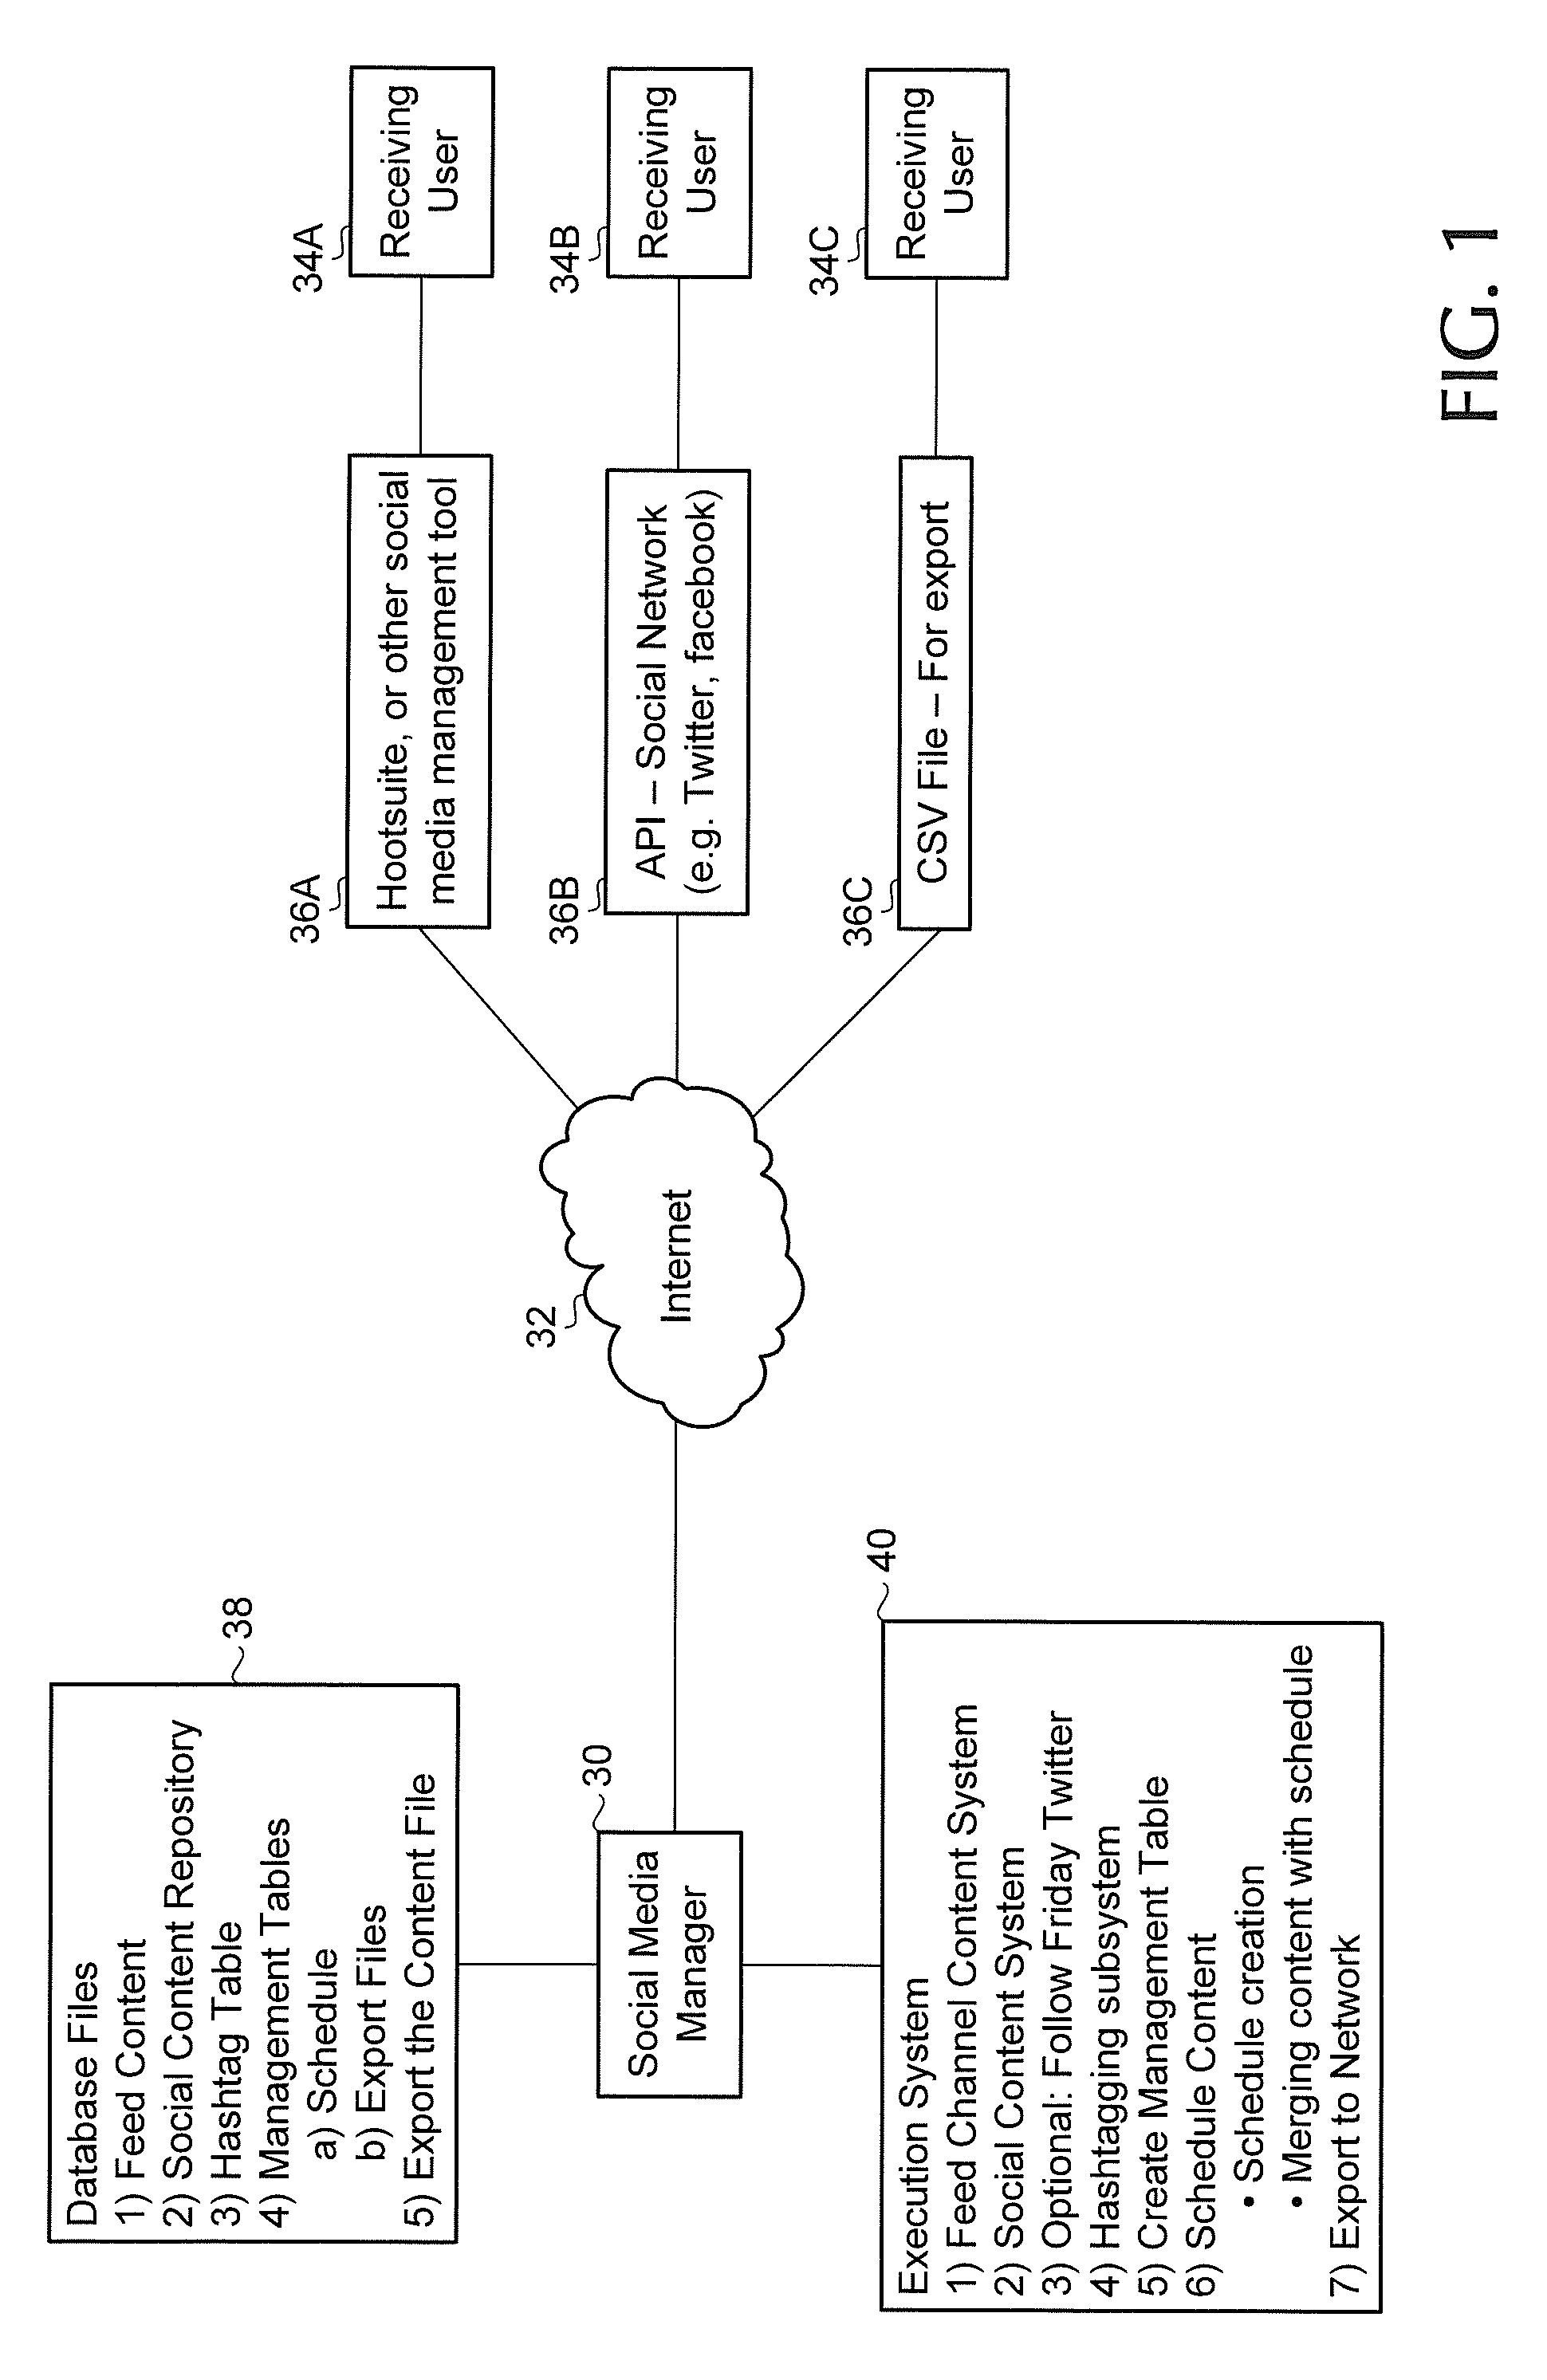 Social media content management system and method